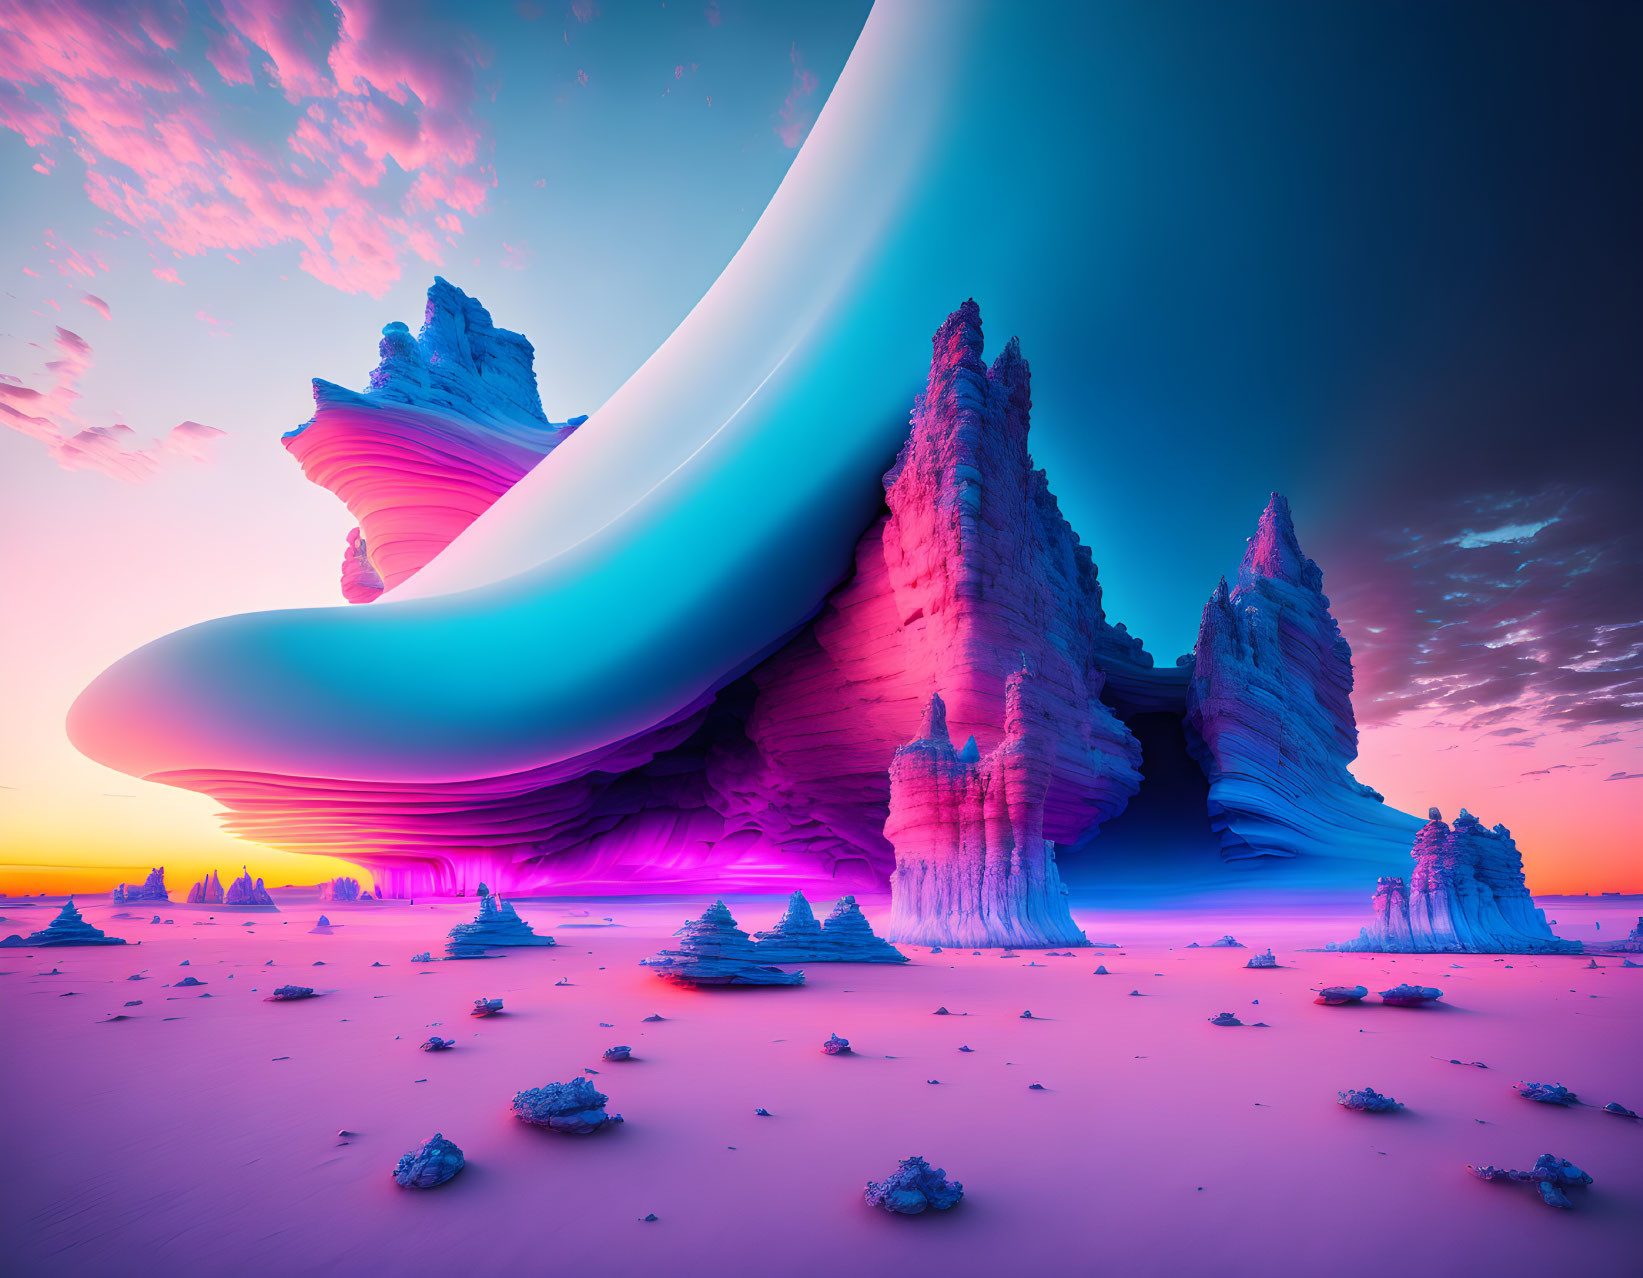 Surreal landscape with towering rock formations and wave-like structure